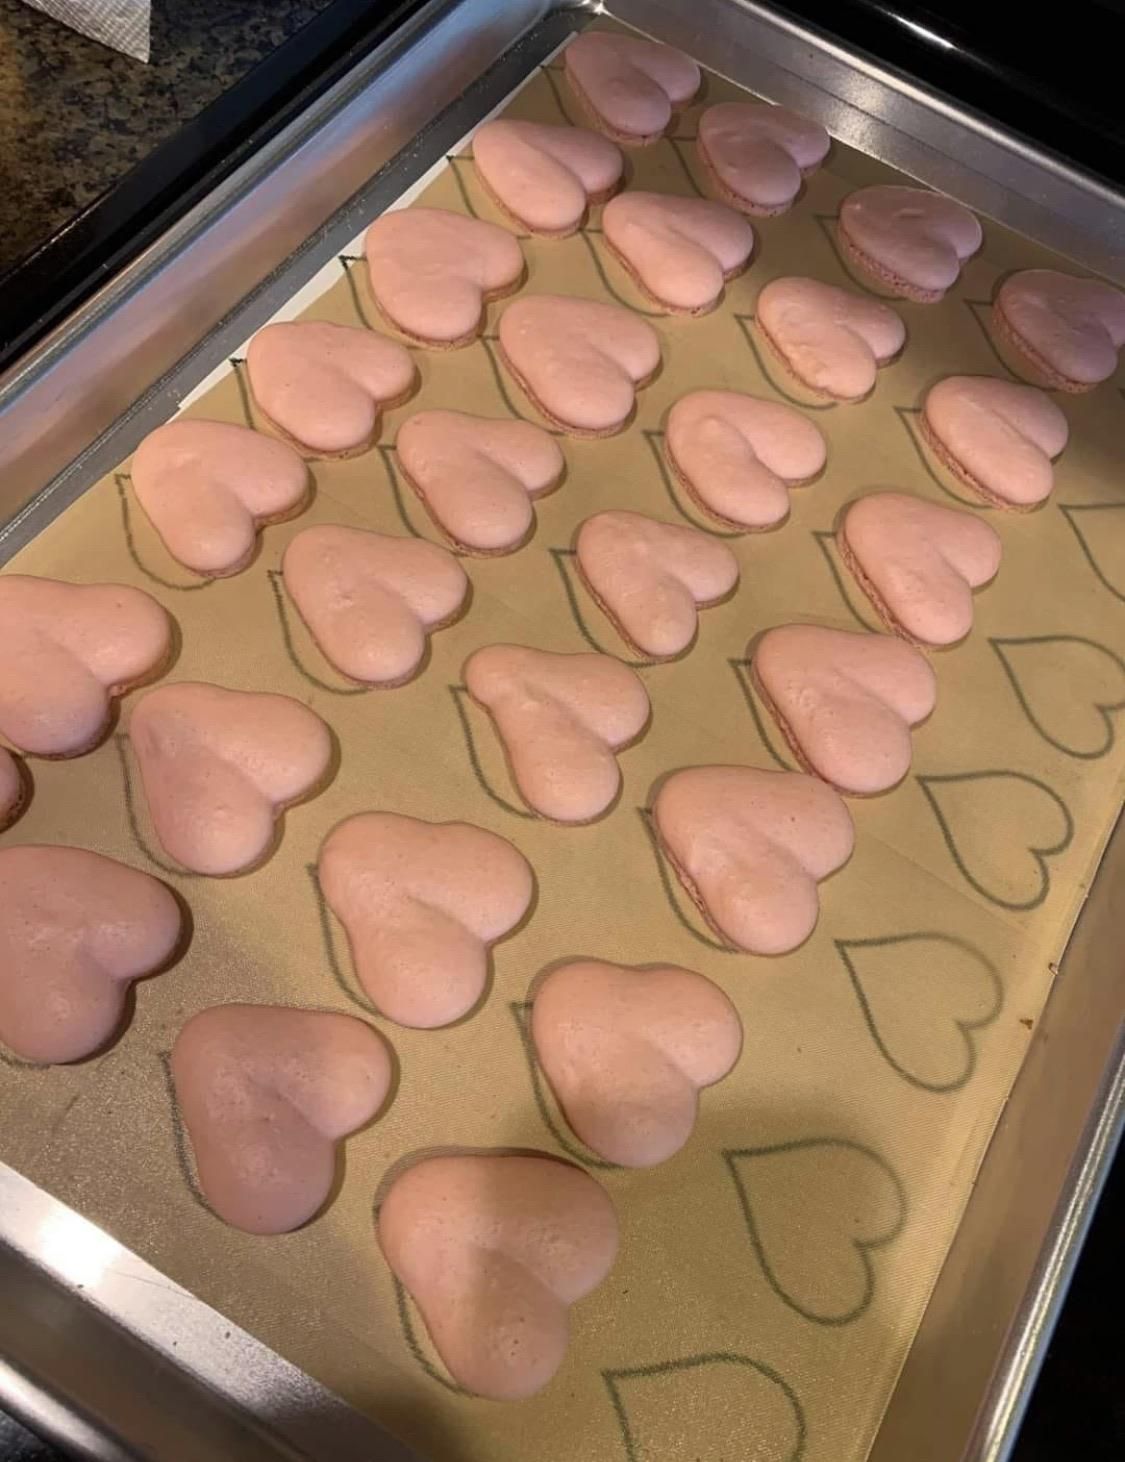 baked heart cookies = testicles